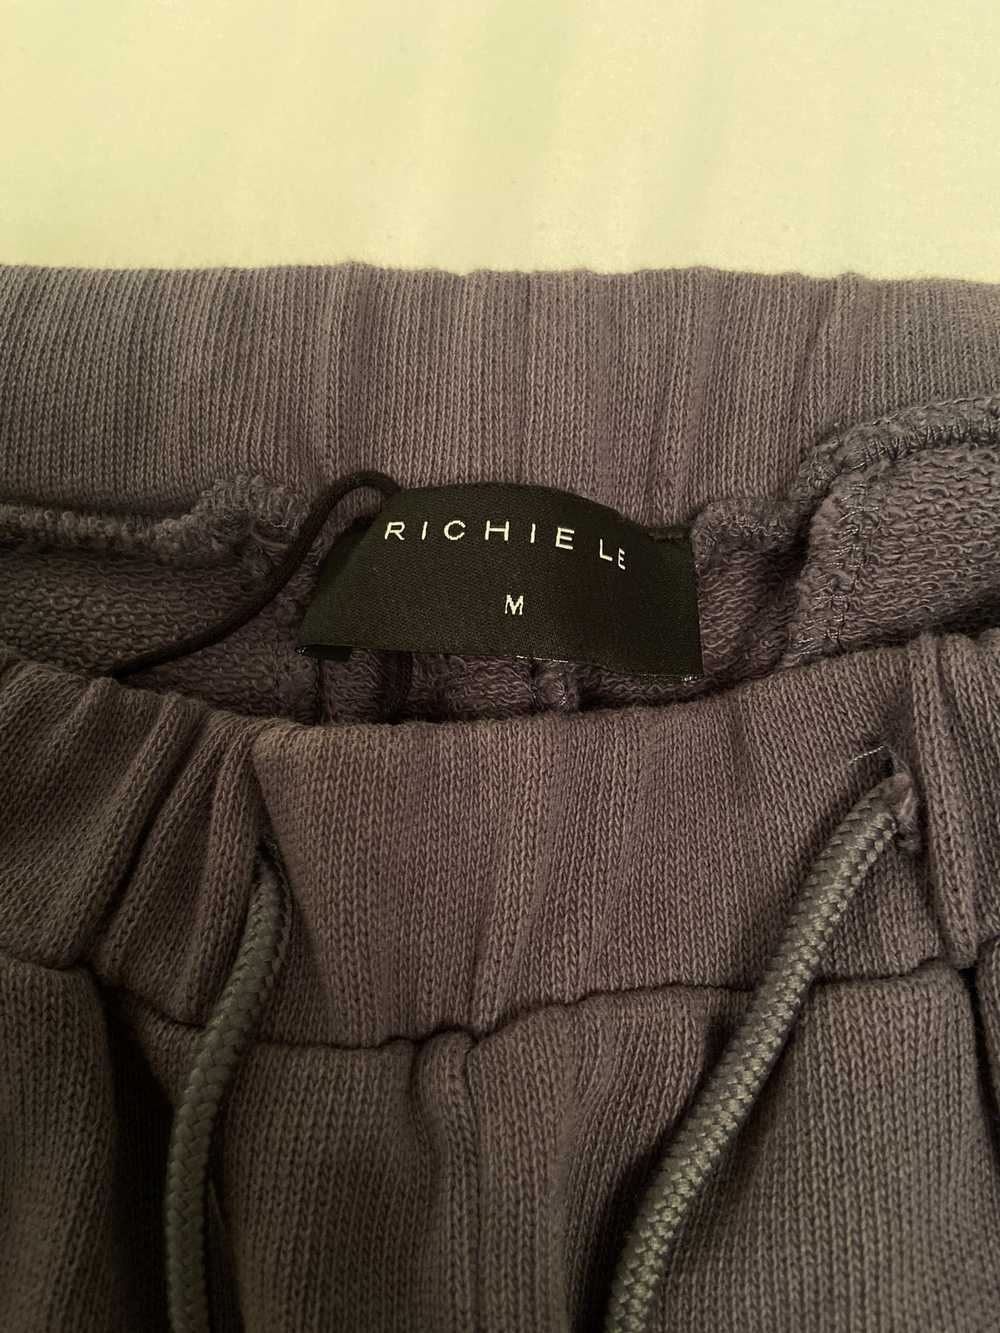 Richie Le Collection Corded Daily Sweatpants - image 6